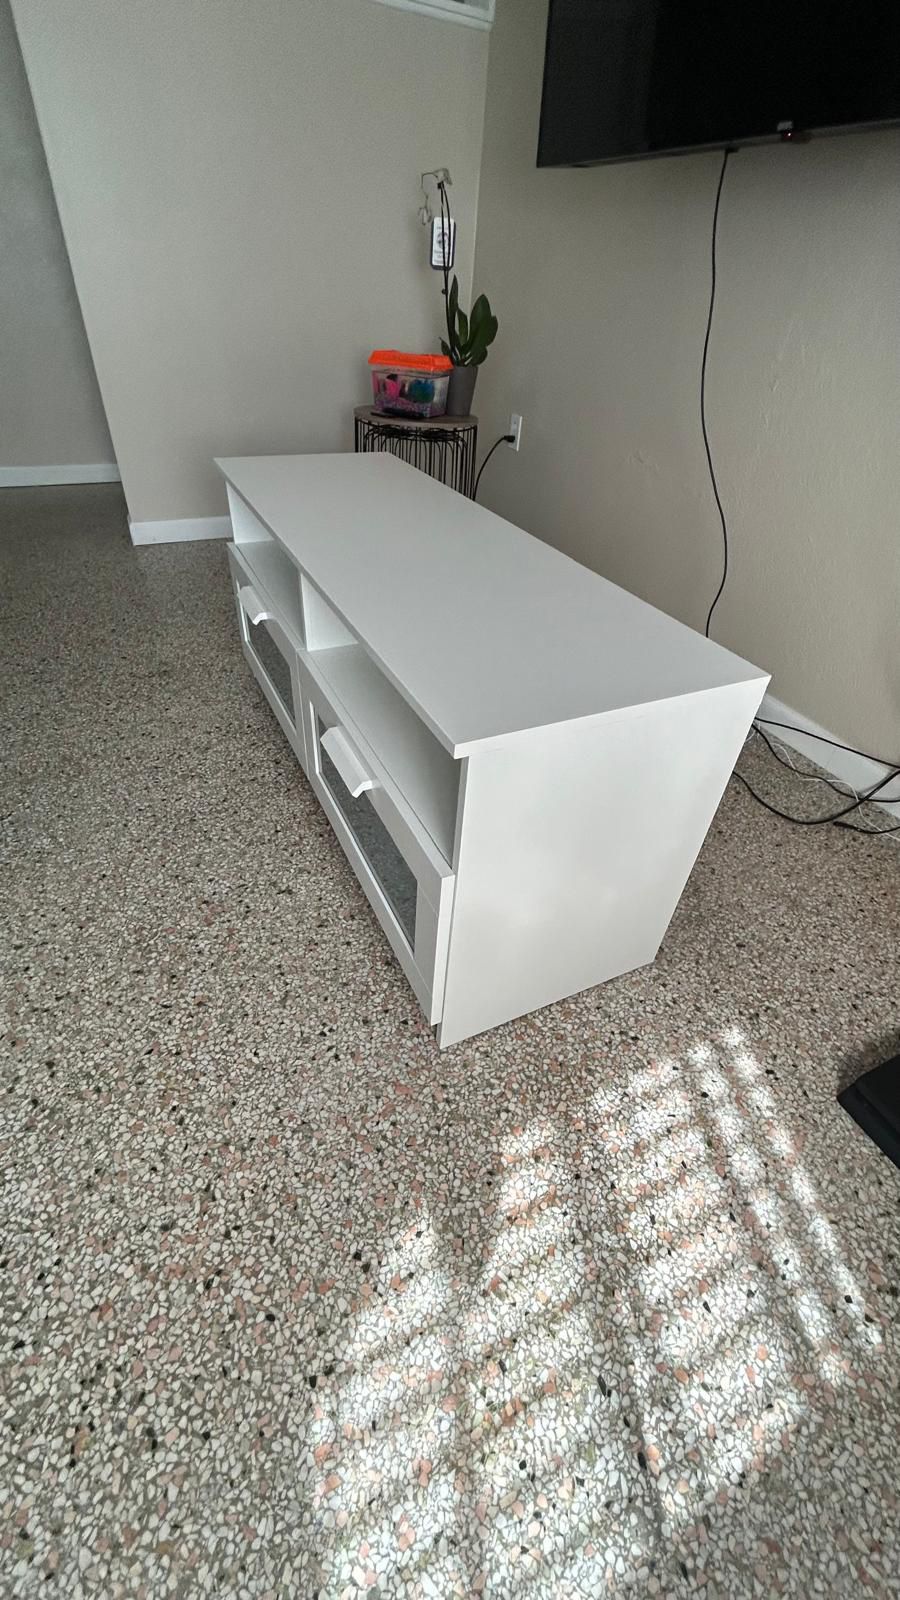 Tv Stand       47 1/4x16 1/8×20 7/8 "